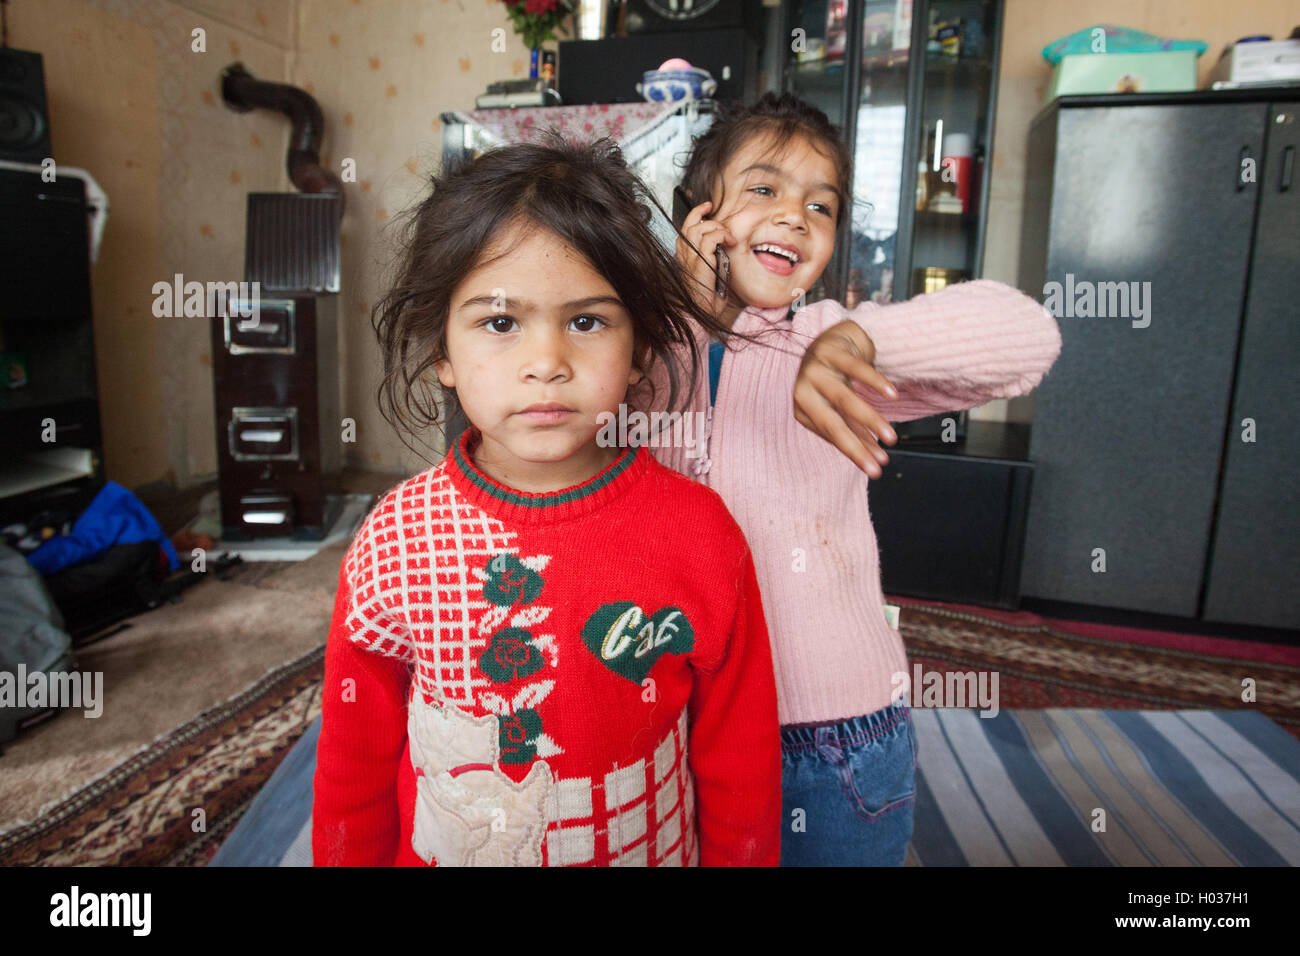 ZAGREB, CROATIA - OCTOBER 21, 2013: Portrait of little Roma girls at their home. Stock Photo